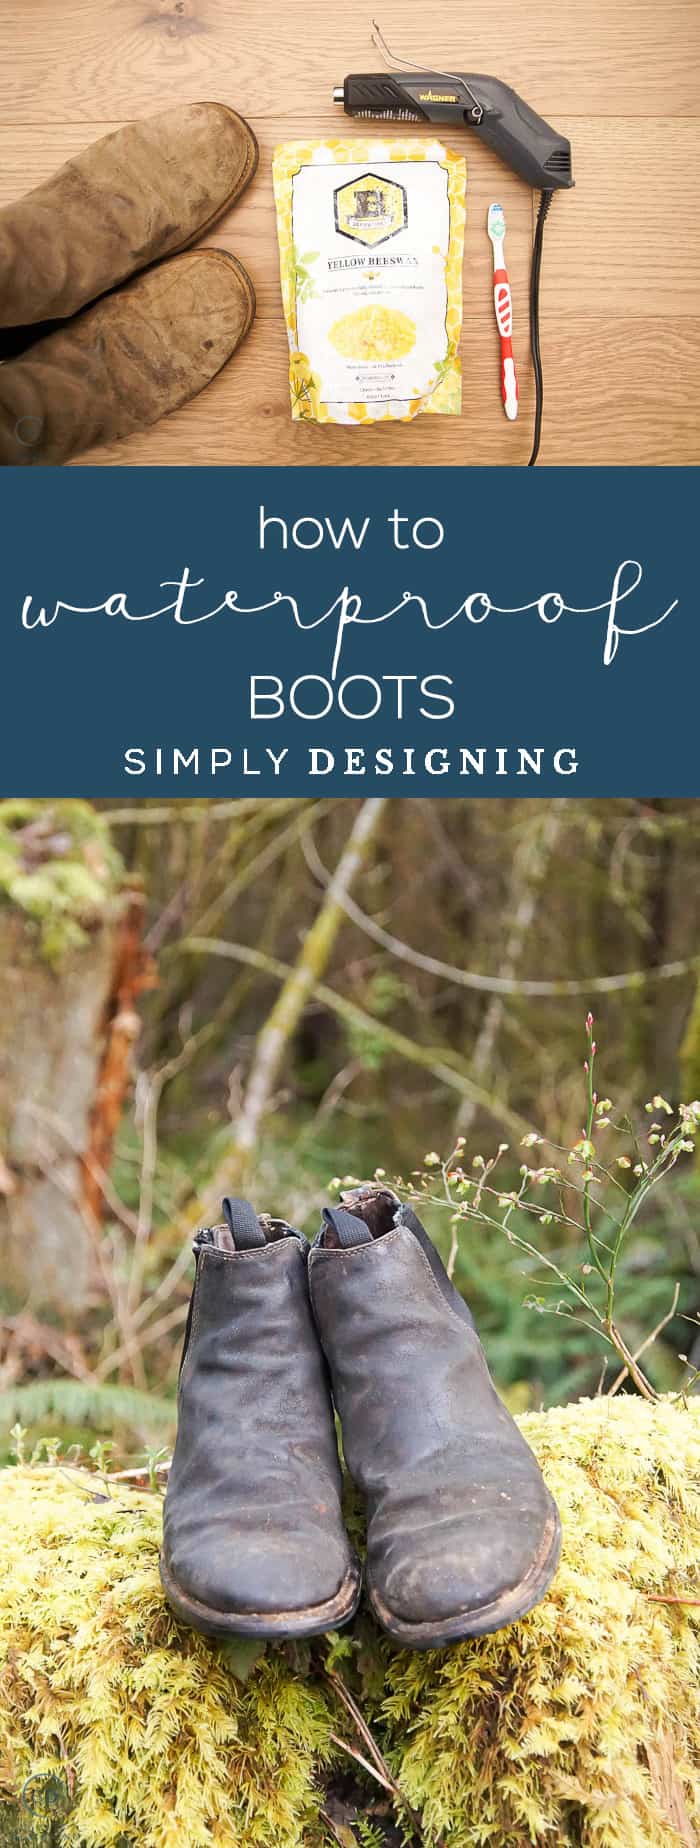 How to Waterproof Boots